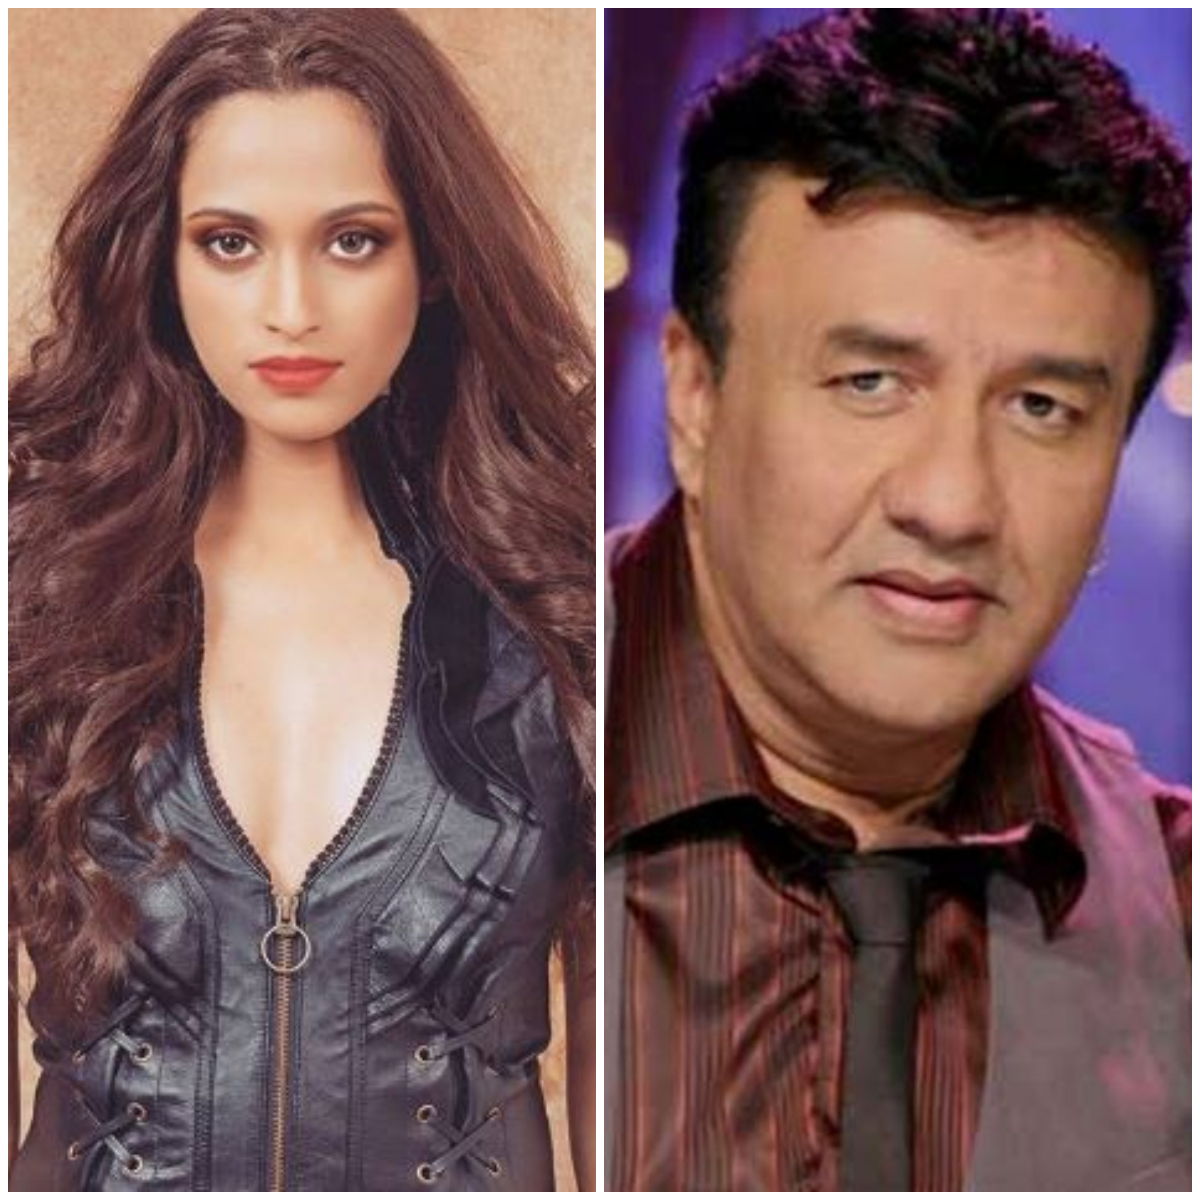 EXCLUSIVE: Shweta Pandit says no amount of apology from Anu Malik can bring back my growing up years